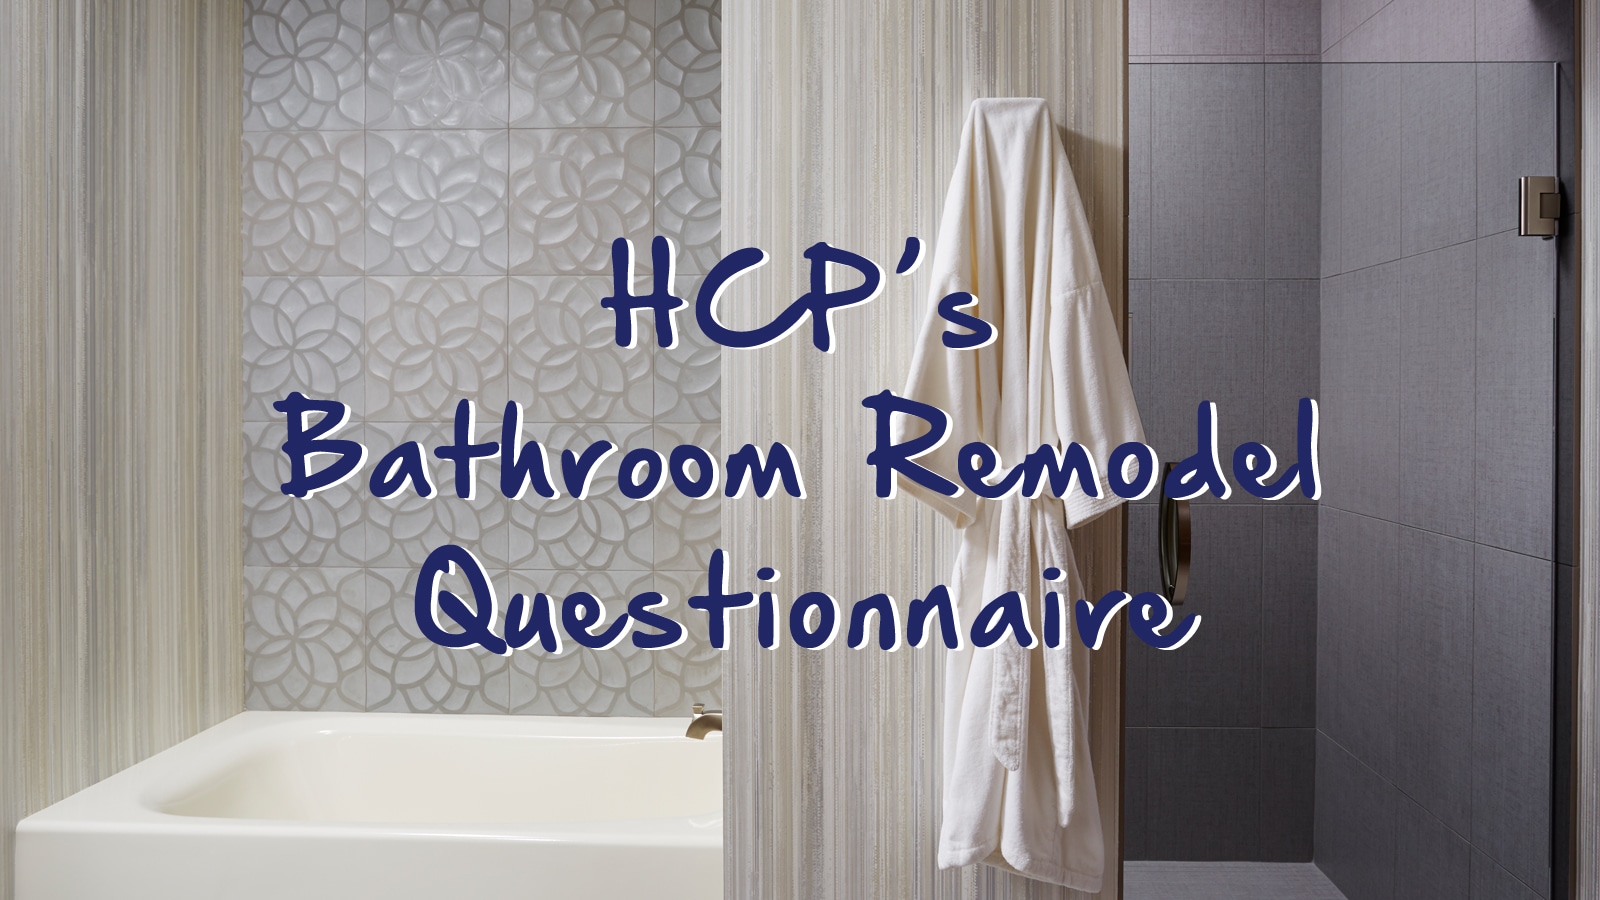 HCP’s Bathroom Remodel Questionnaire